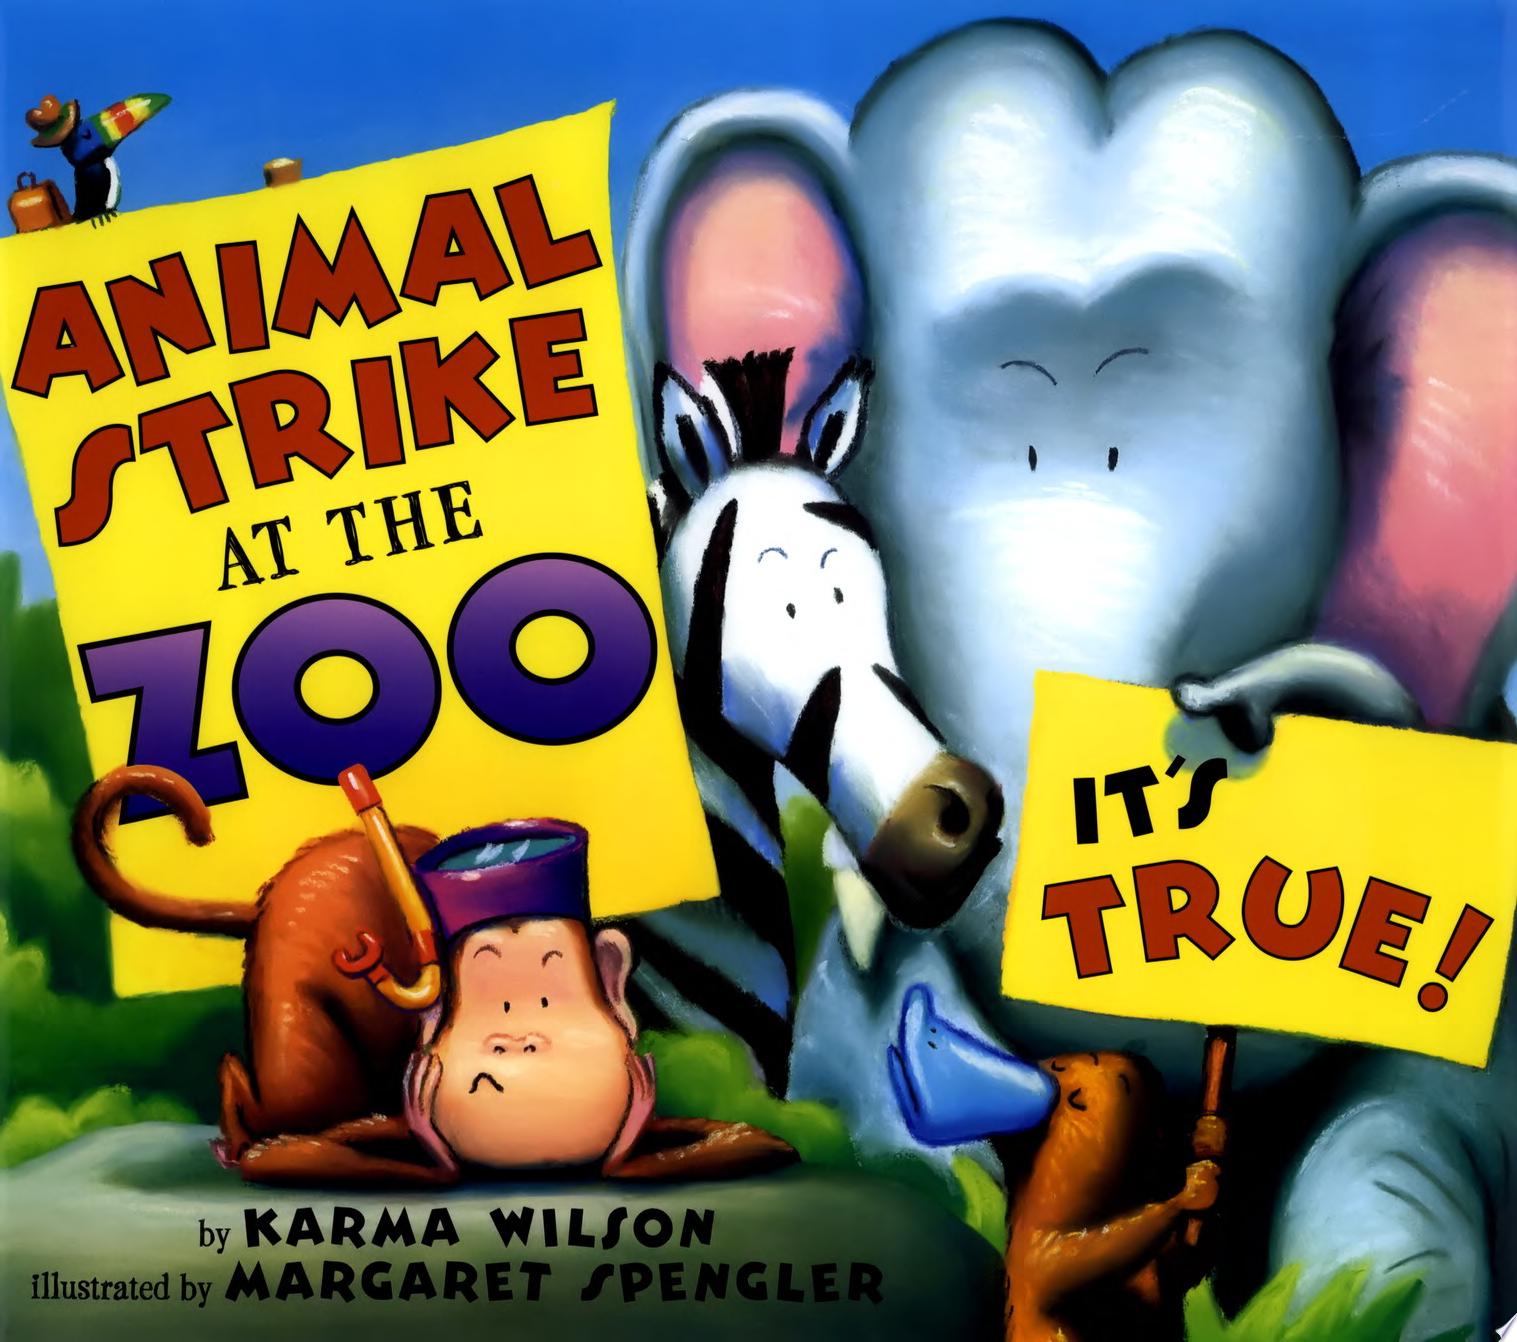 Image for "Animal Strike at the Zoo. It's True!"